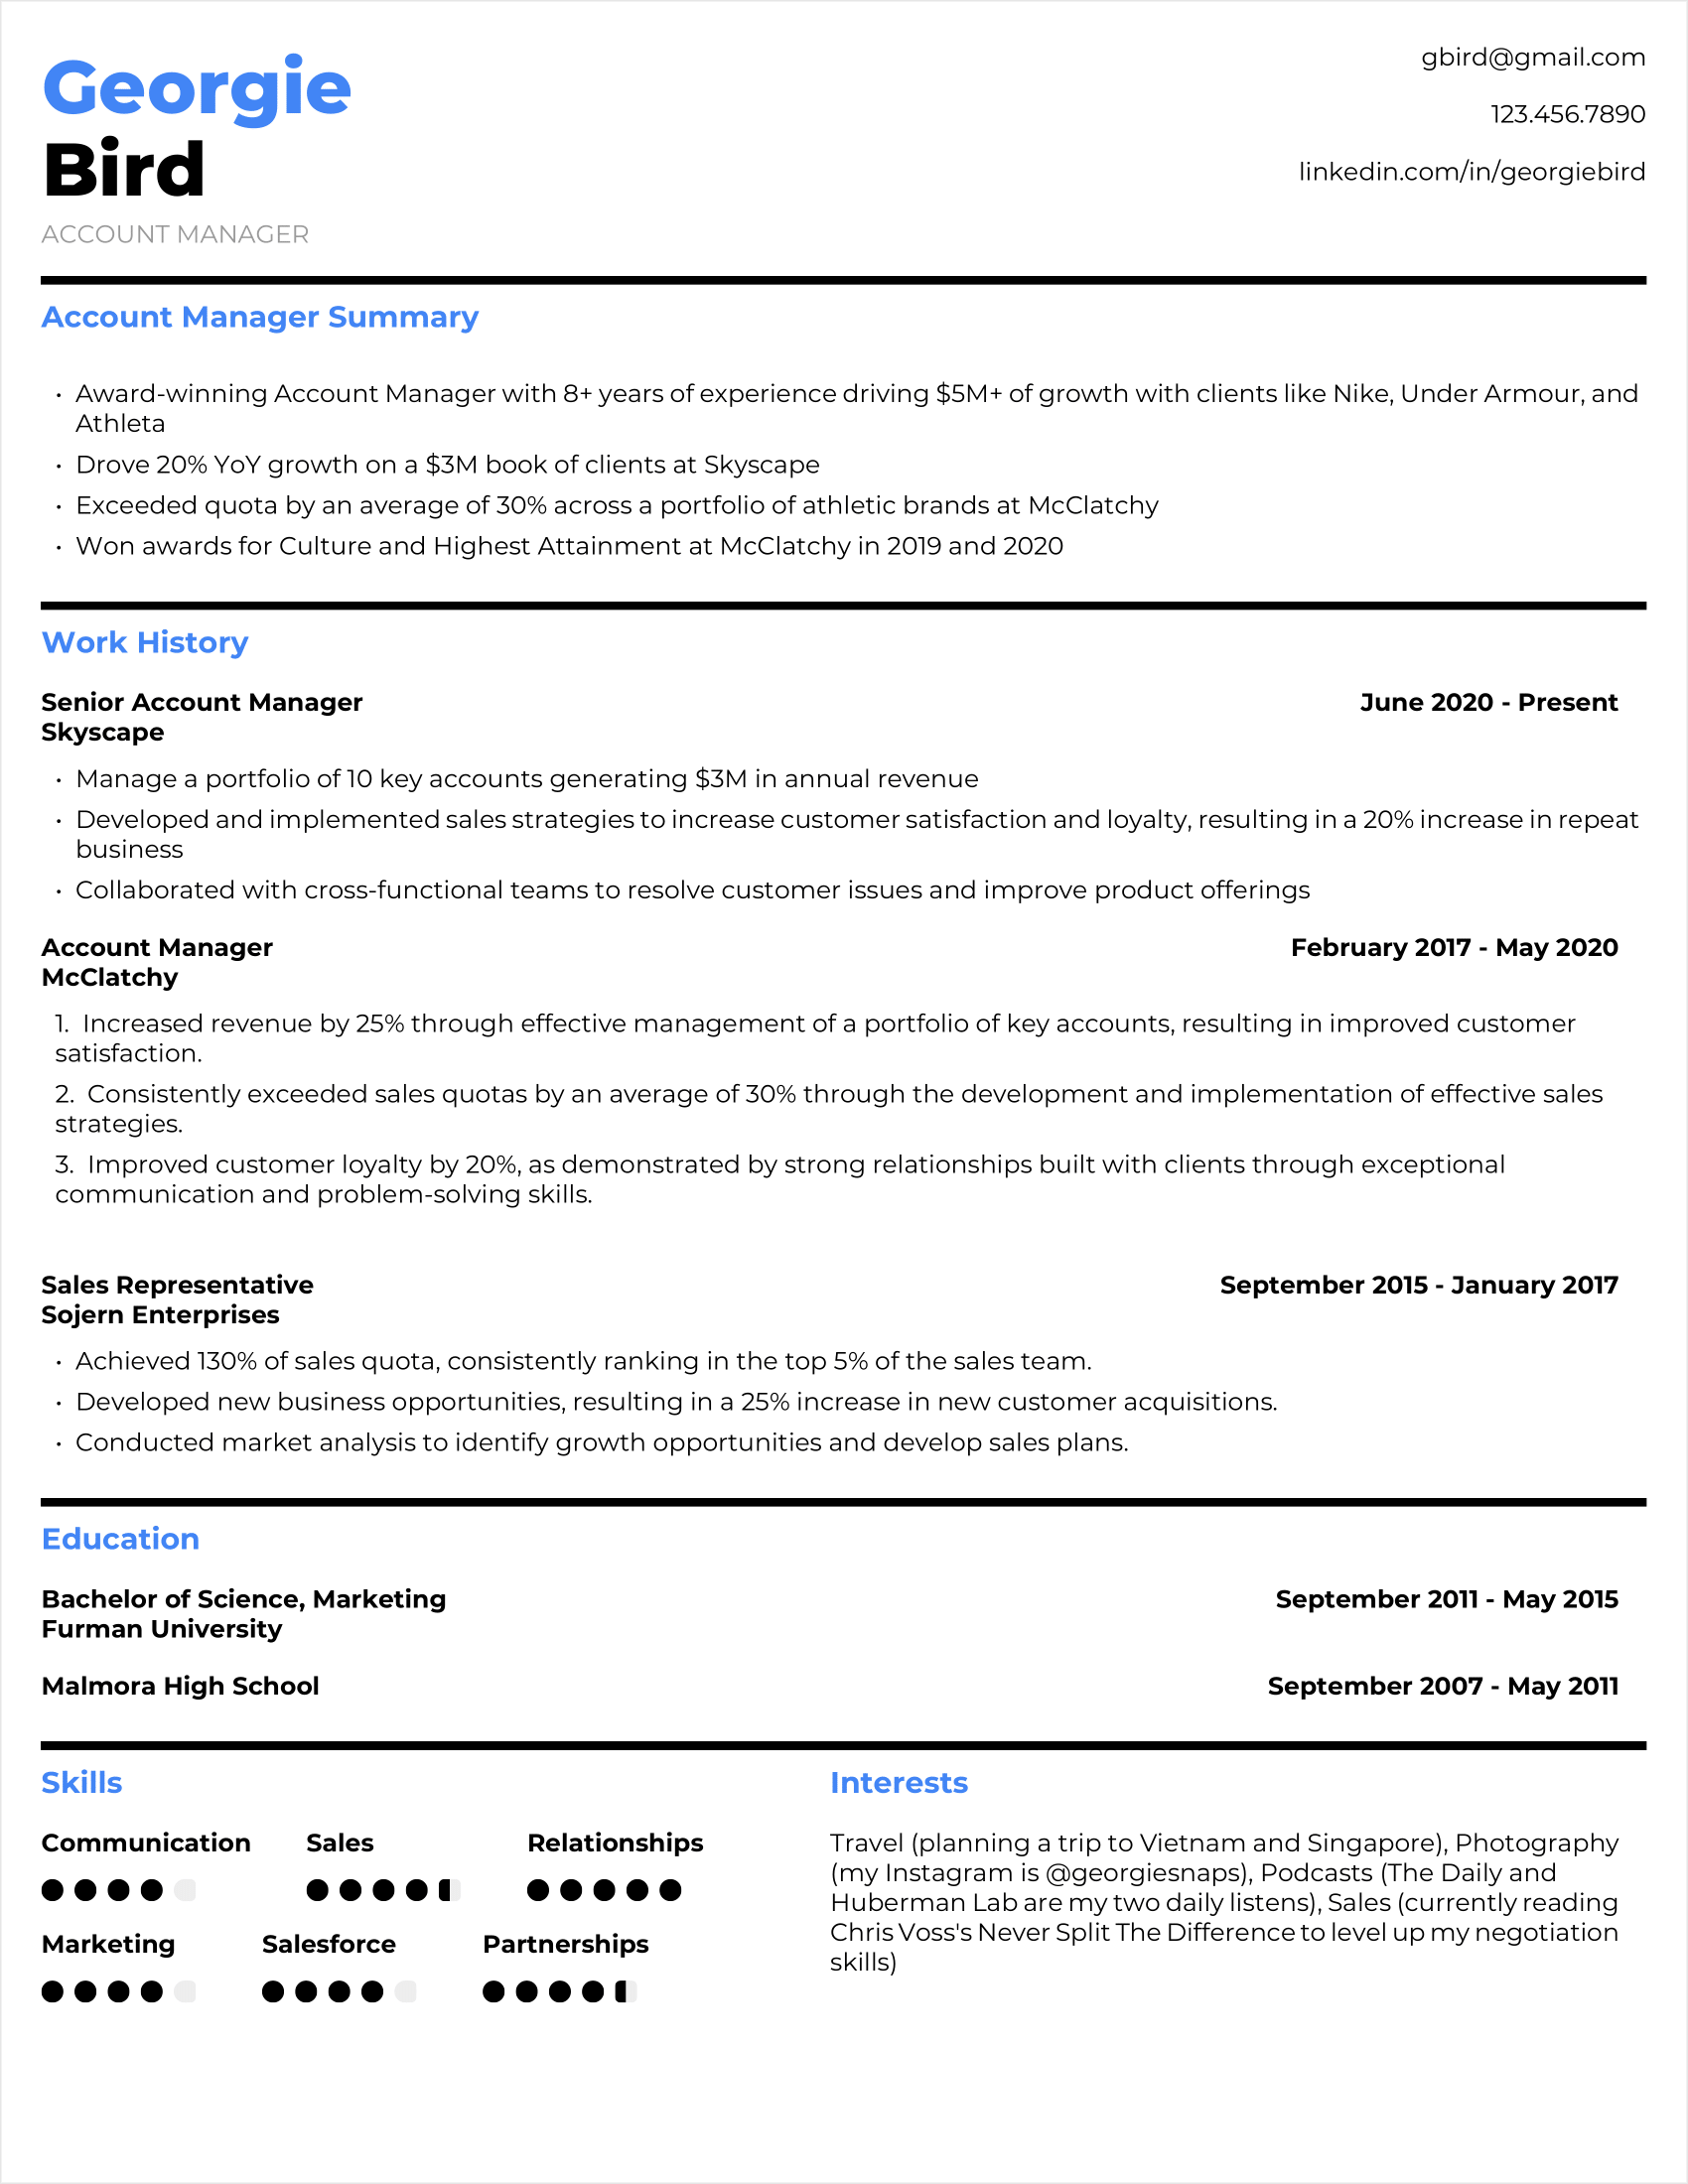 Account Manager Resume Example #1 - Traditional